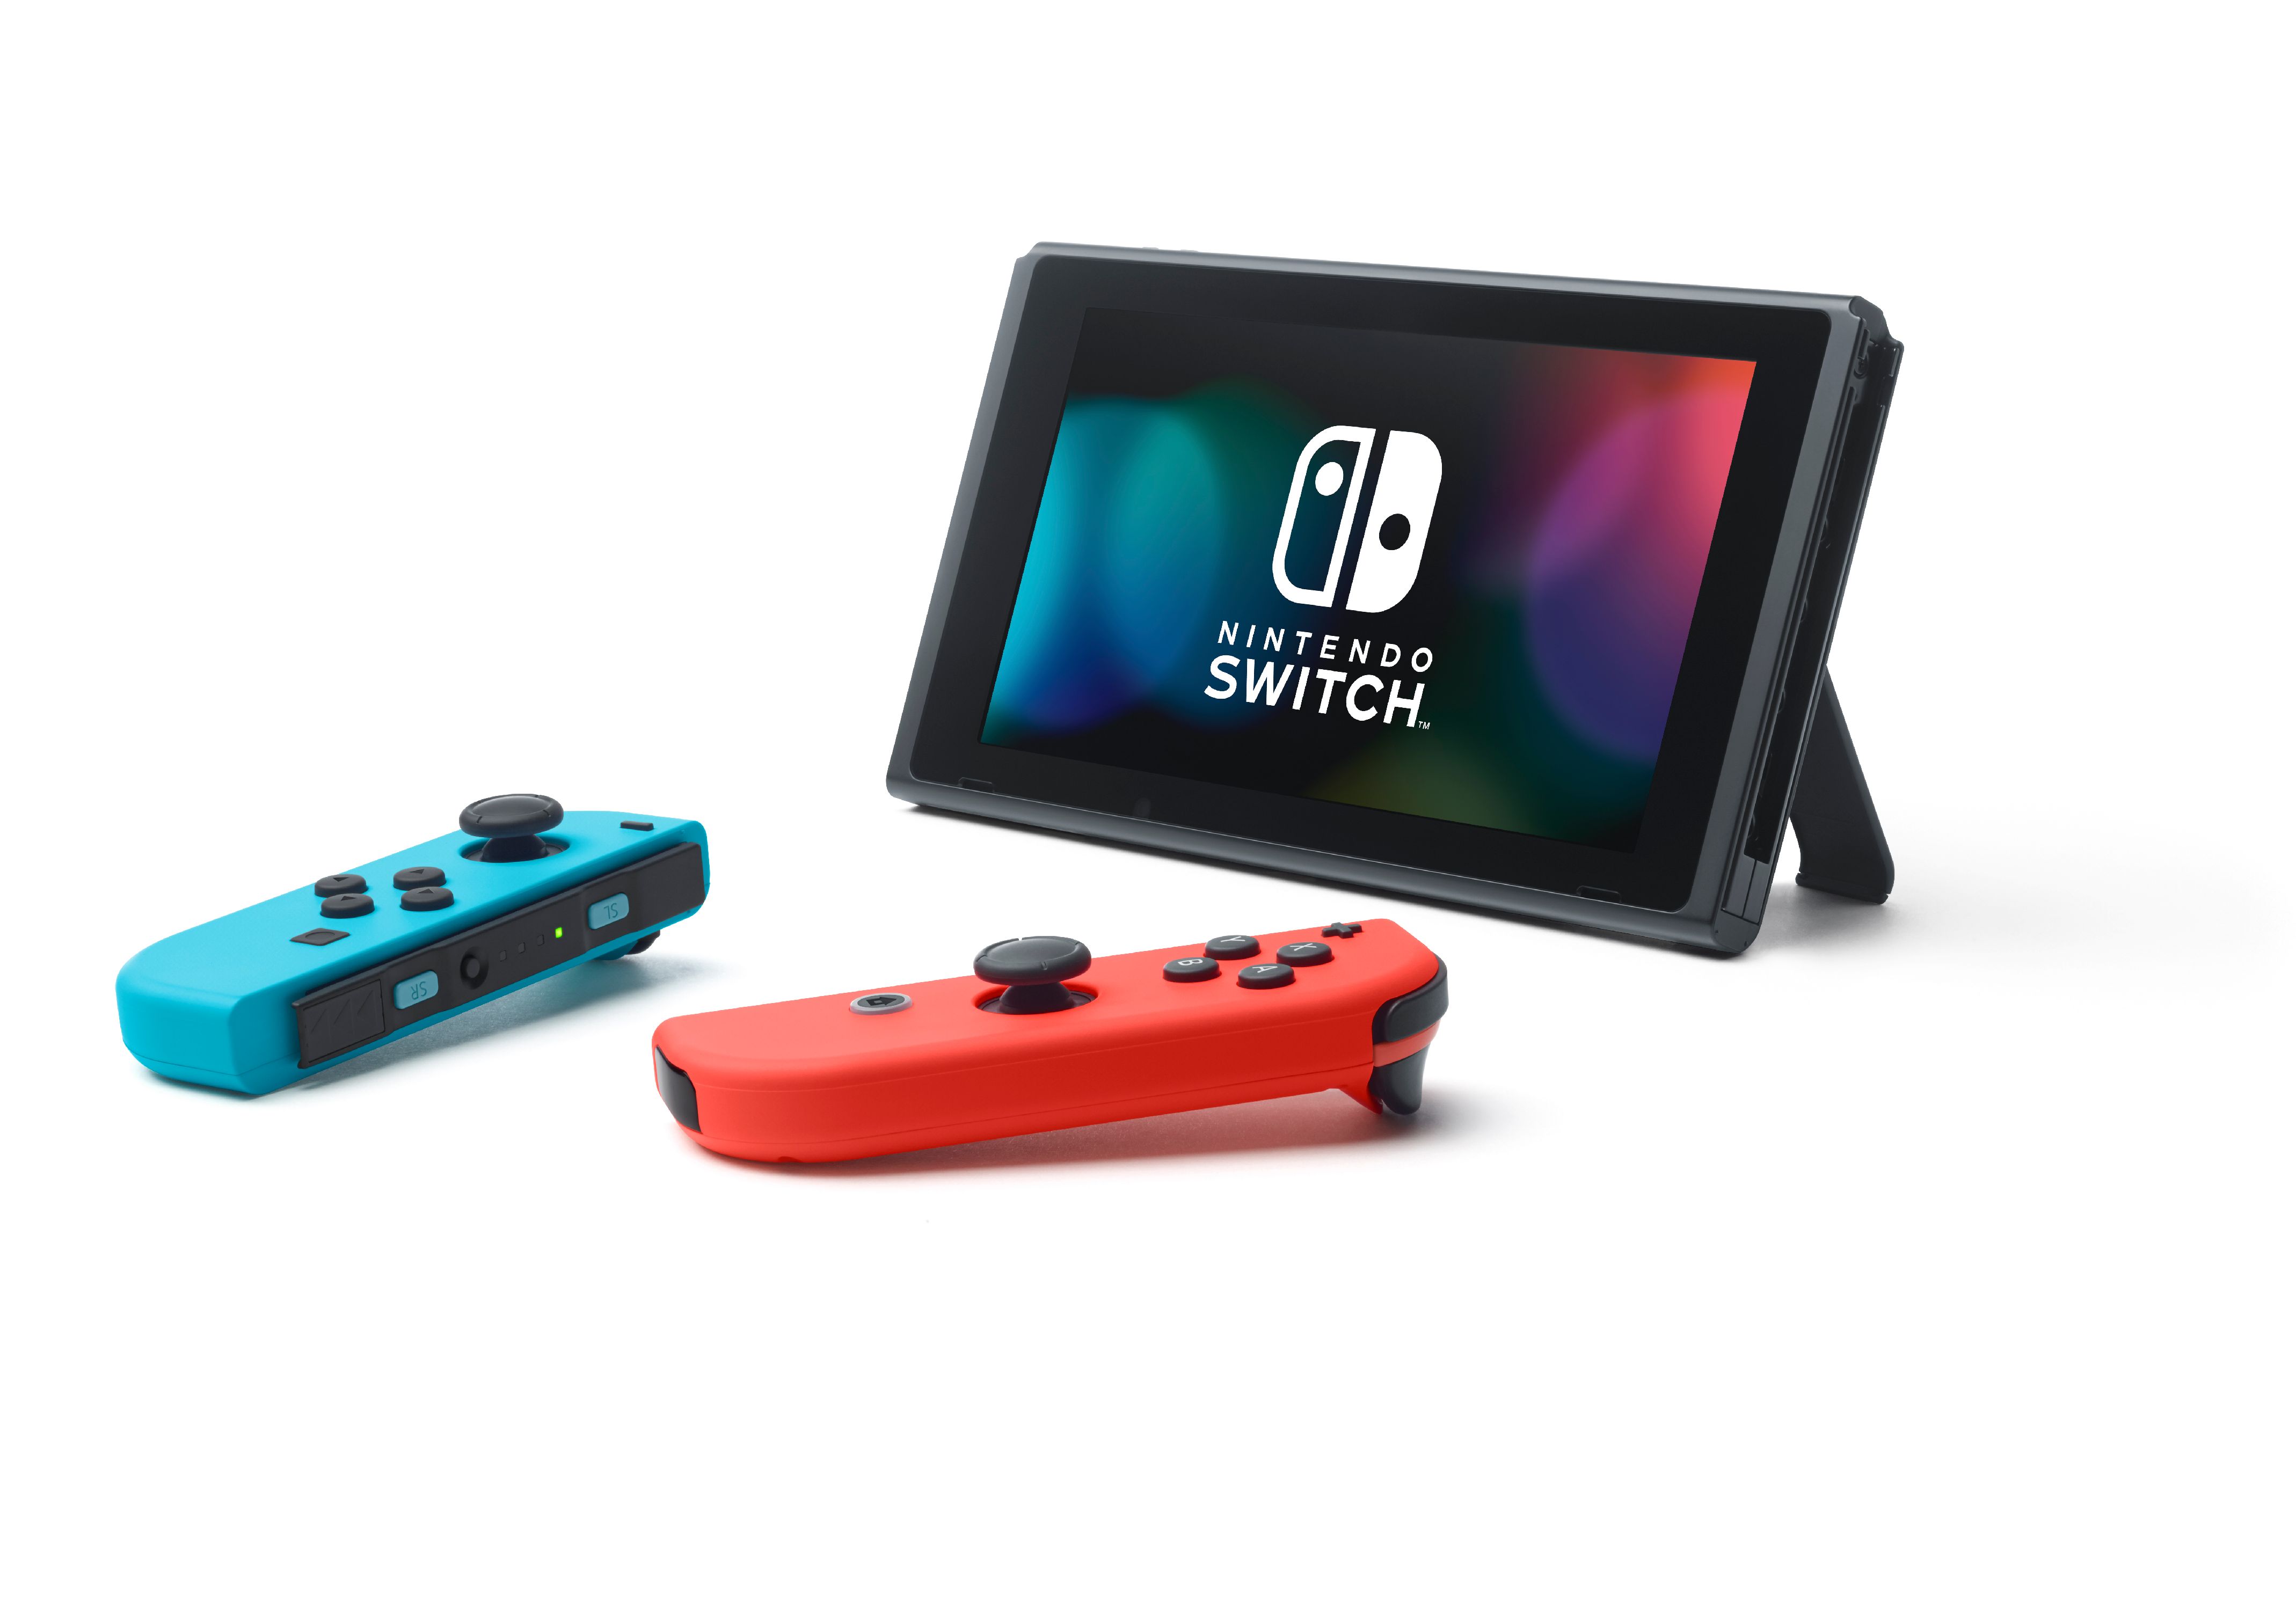 Nintendo Switch Gaming Console Neon Blue and Neon Red Joy-Con Bundle with Mario Kart Deluxe 8 - image 3 of 4